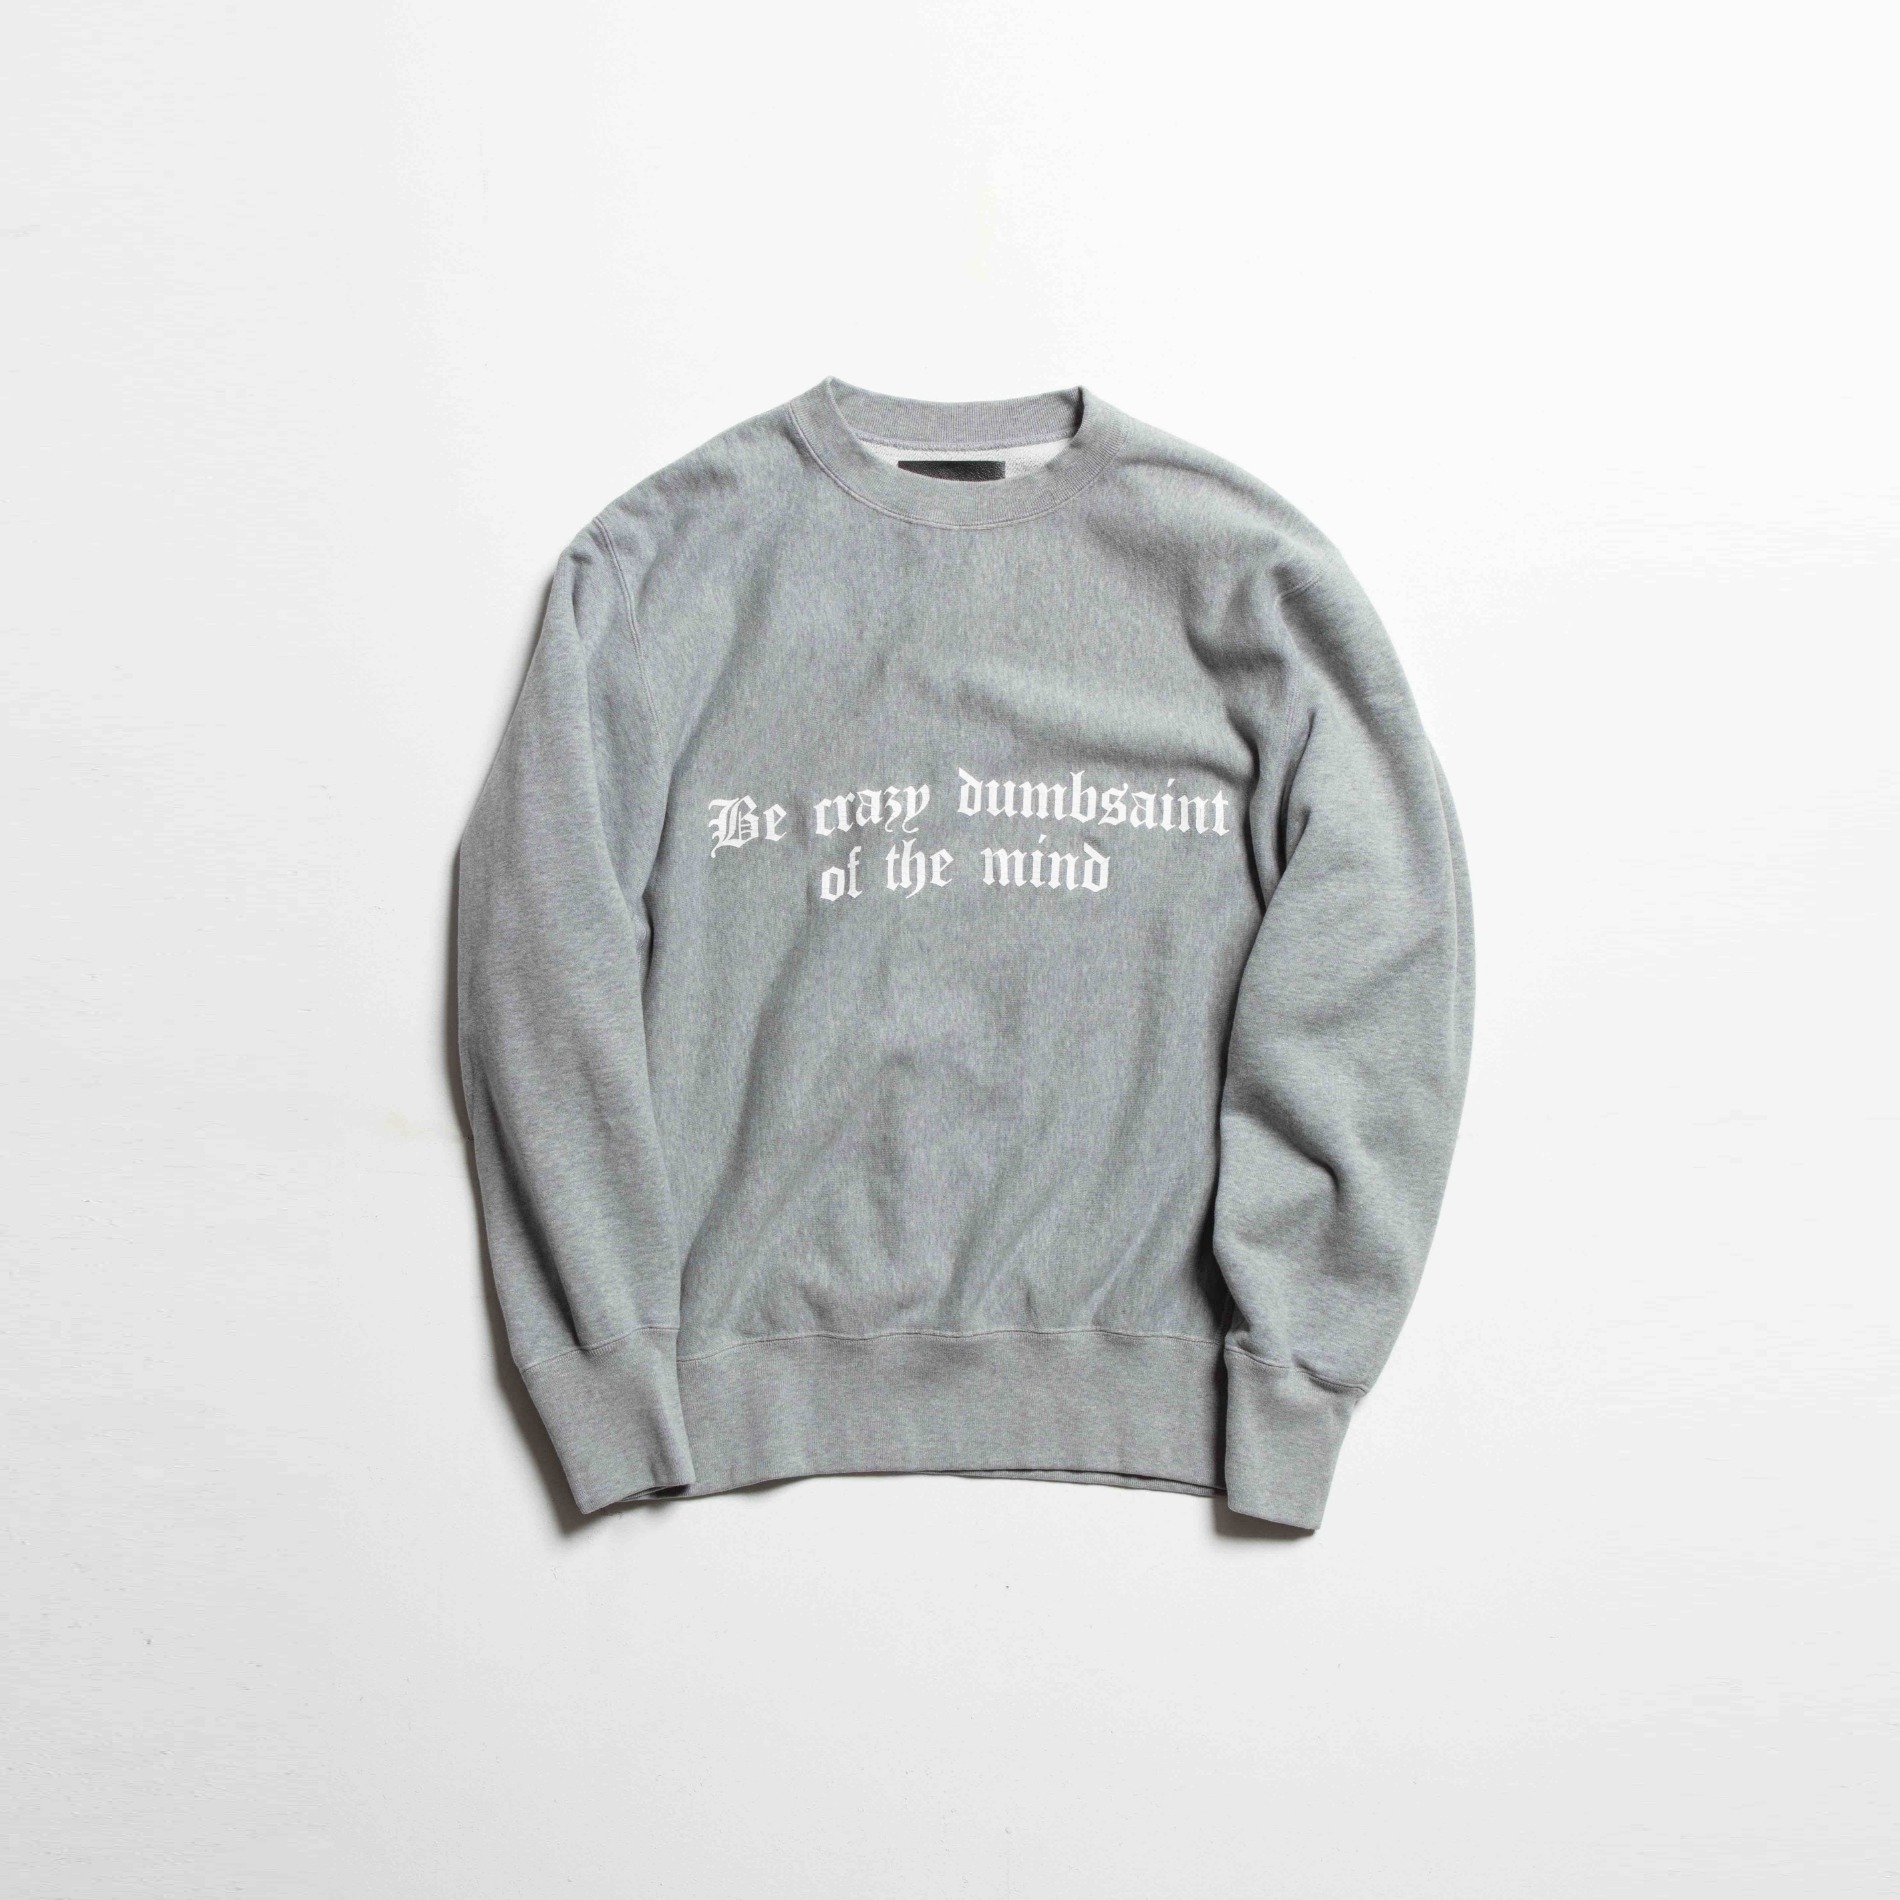 SS22 THE LETTERS CREW NECK SWEAT SHIRT LOOP WHEEL COTTON GRAY